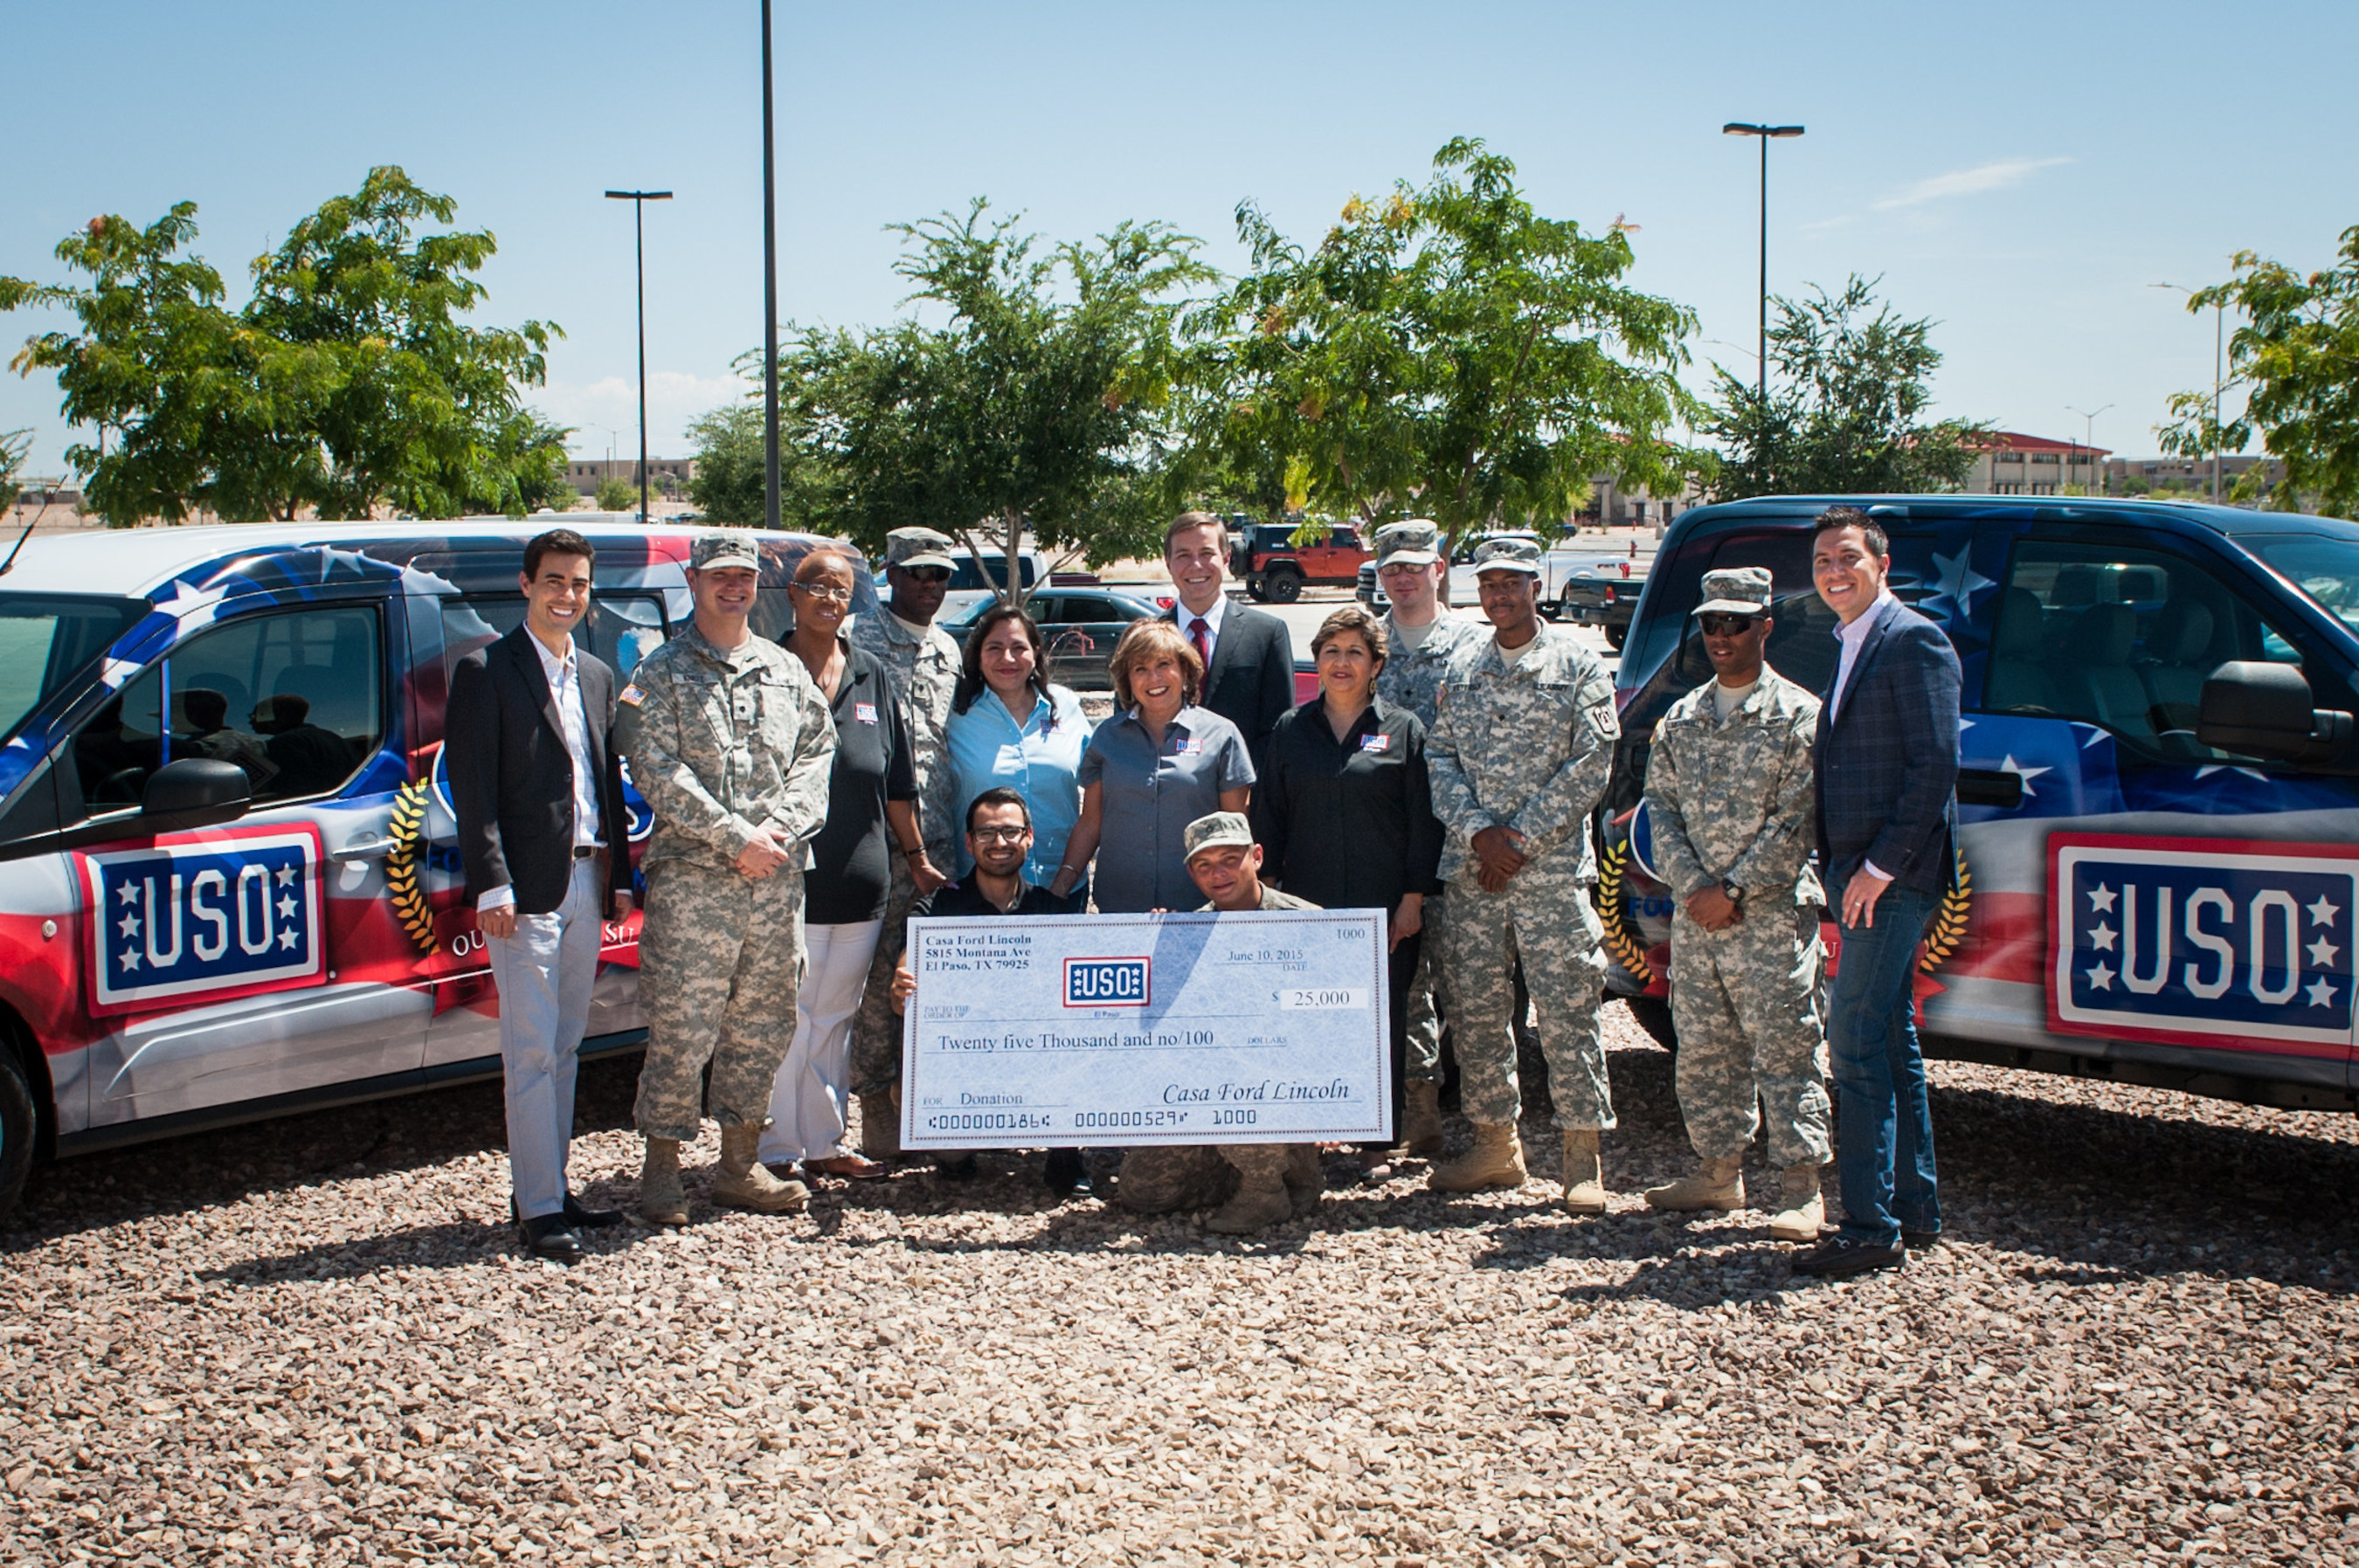 USO staff and service members receive $25,000 donation and custom wrapped vehicles from Casa Ford Lincoln. Photo by Armando Martinez Photography